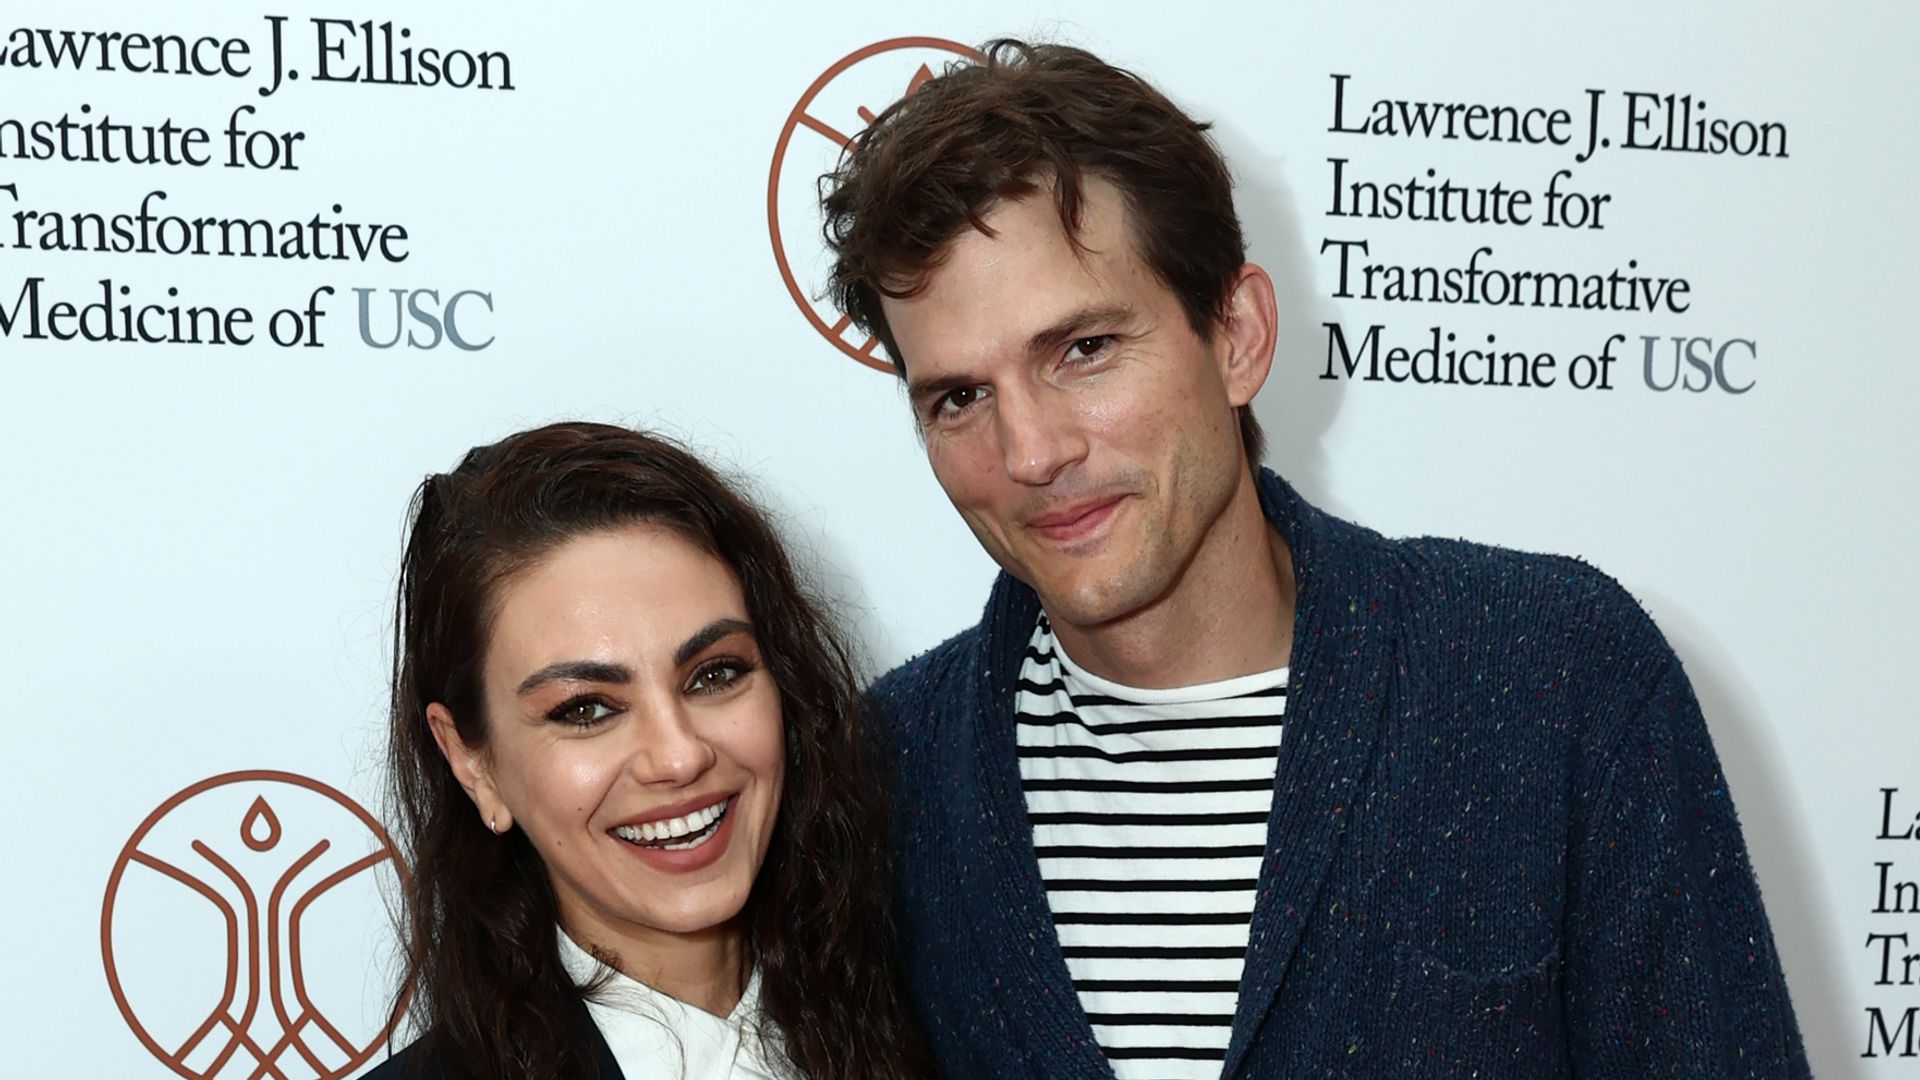 Mila Kunis and Ashton Kutcher attend the Grand Opening of the Lawrence J. Ellison Institute on September 28, 2021 in Los Angeles, California